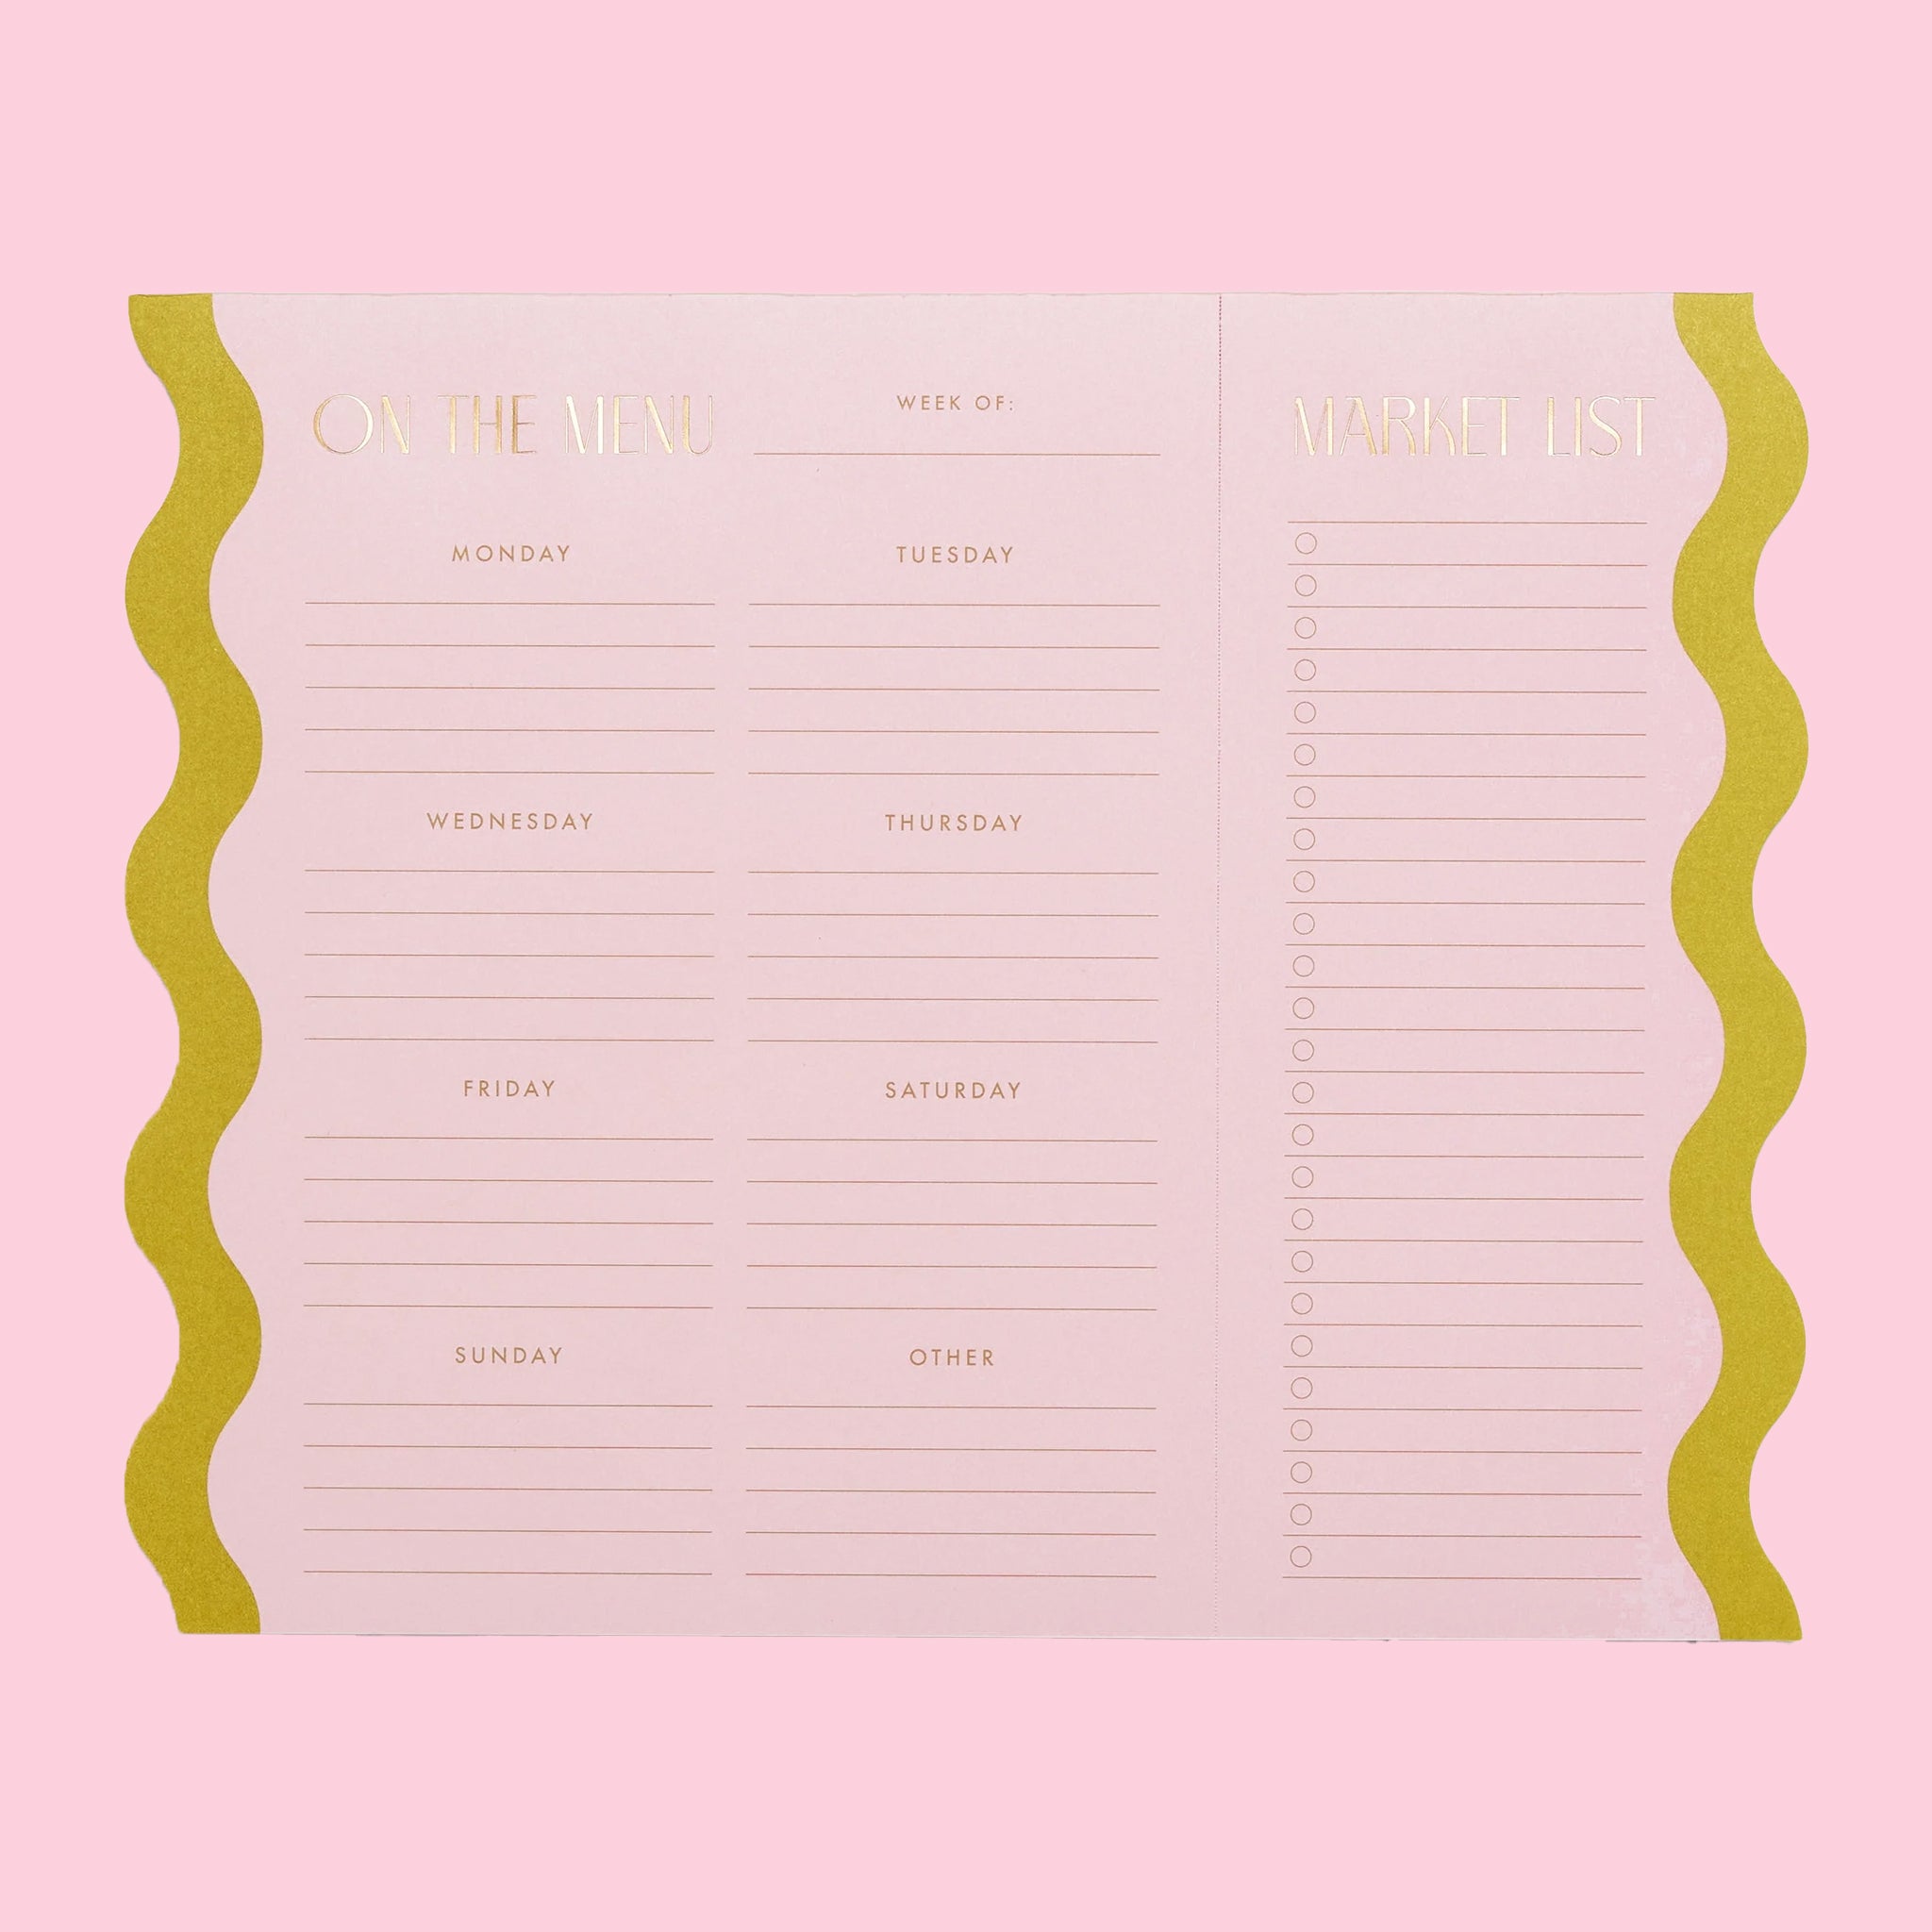 On a pink background is a pink notepad with a chartreuse wavy edge on both sides and a magnet on the back for easy hanging. 